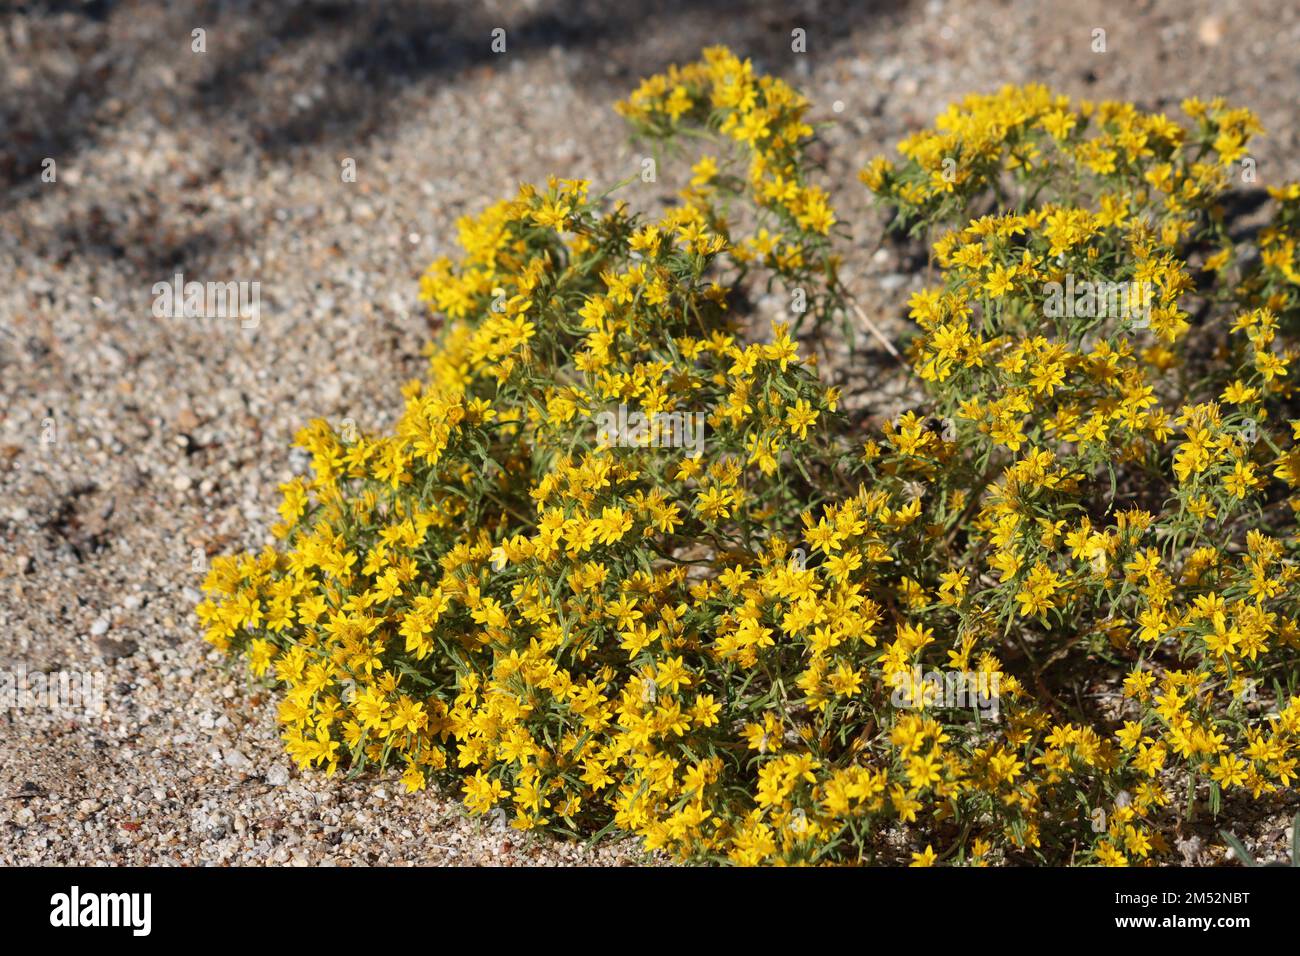 Yellow flowering racemose radiate head inflorescences of Pectis Papposa Variety Papposa, Asteraceae, native herb in the Borrego Valley Desert, Autumn. Stock Photo